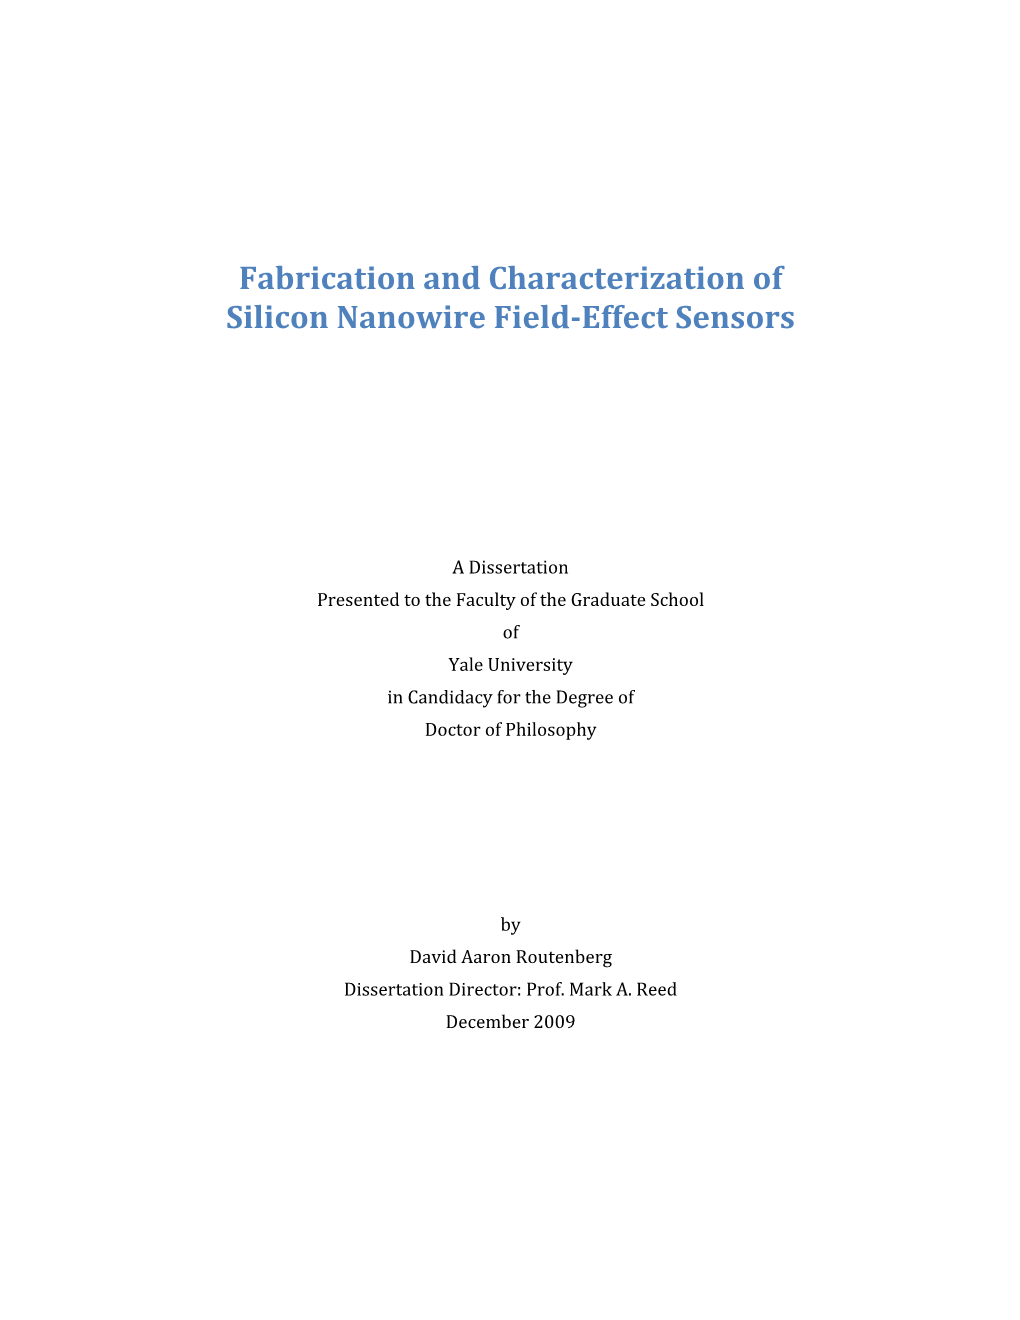 Fabrication and Characterization of Silicon Nanowire Field-Effect Sensors